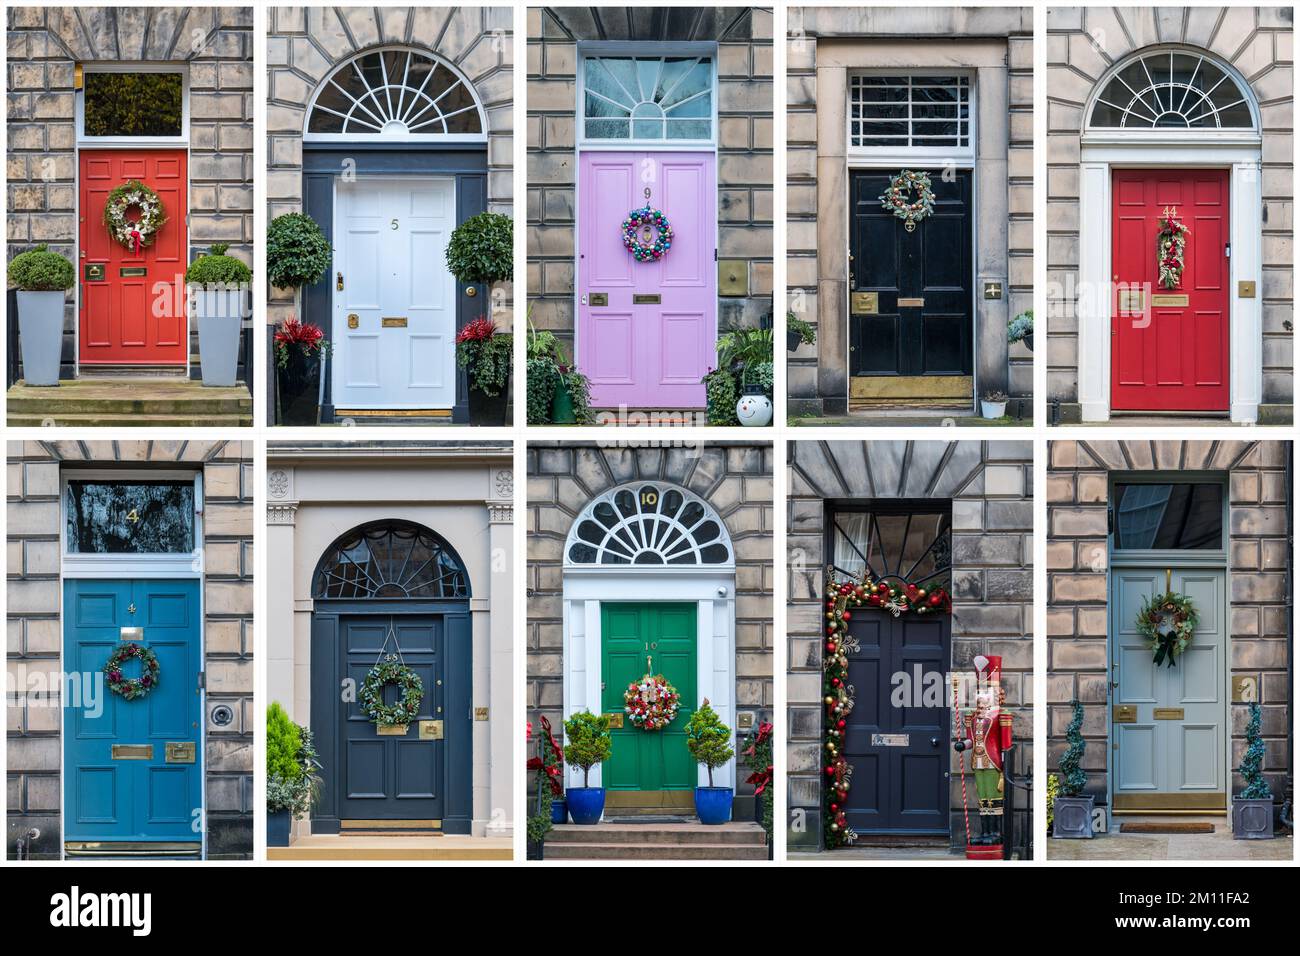 Composite montage of New Town Georgian house front doors with Christmas wreaths and fanlights, Edinburgh, Scotland, UK Stock Photo